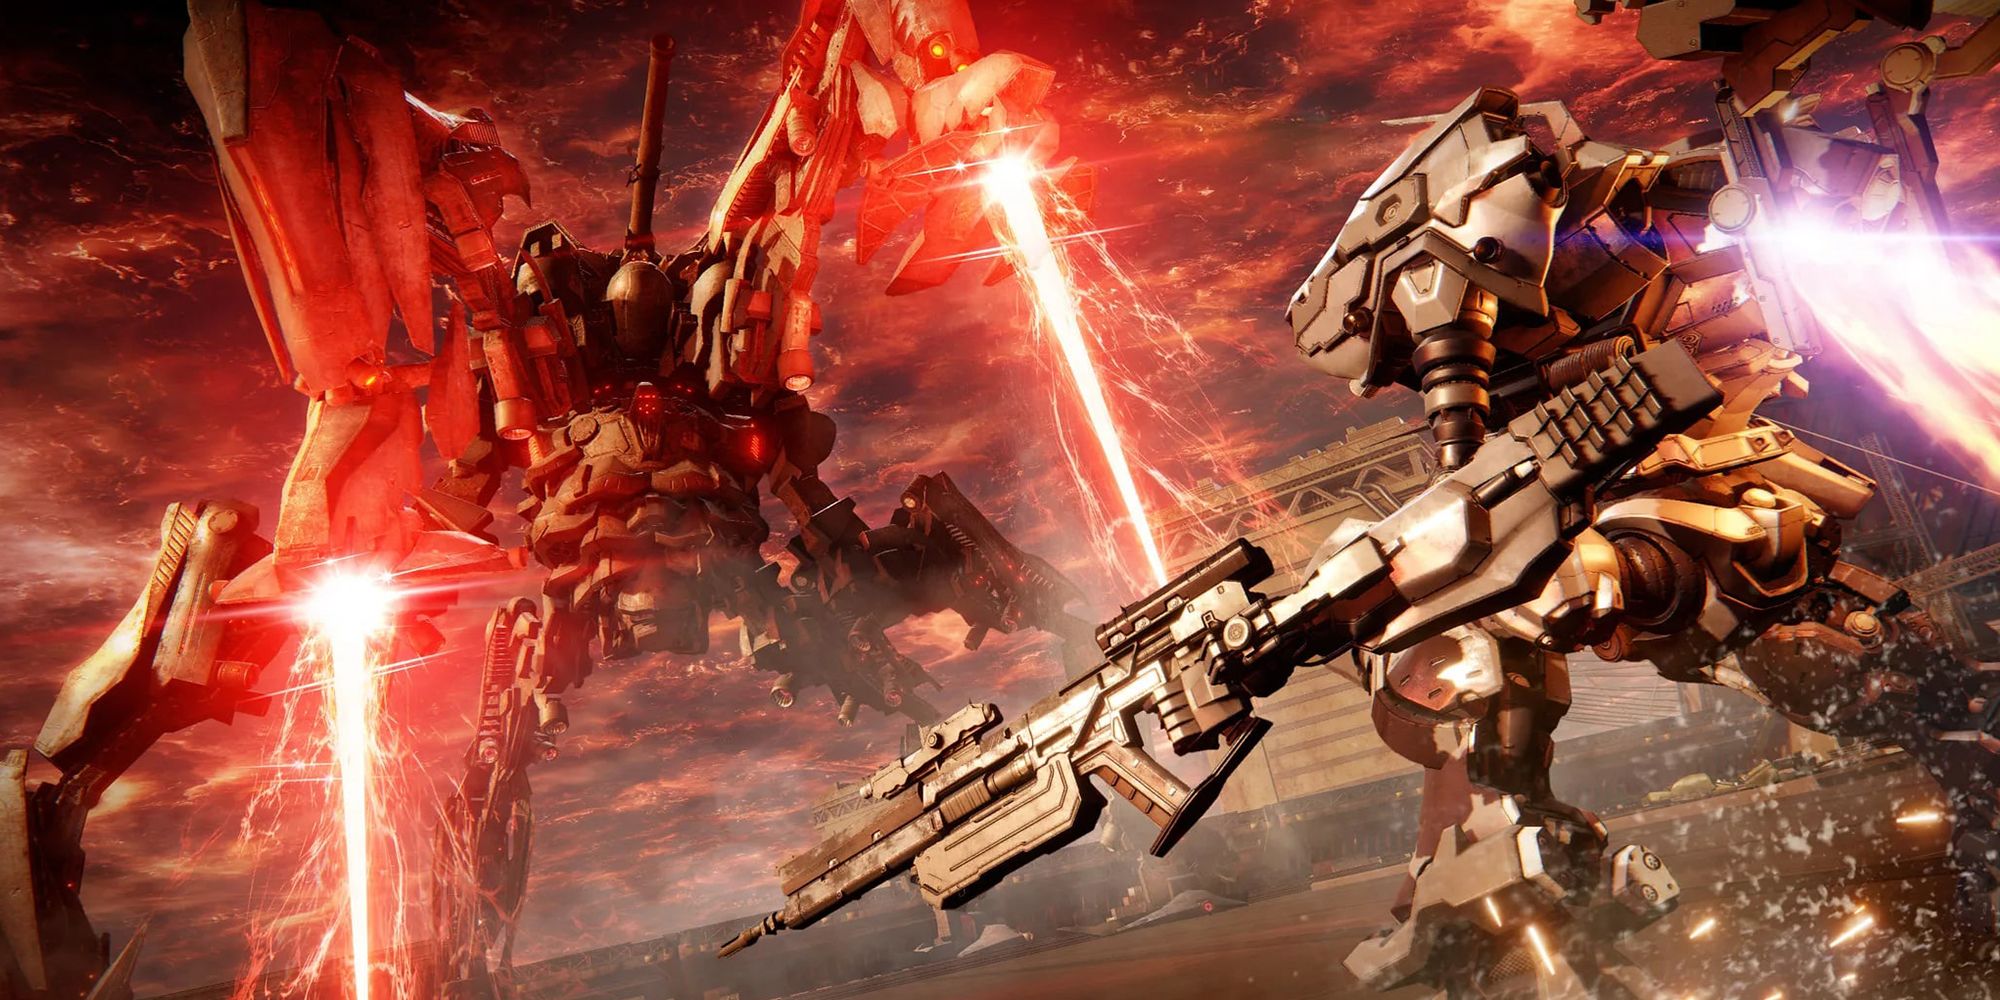 Two mechas with jet packs and laser weapons fighting each other in Armored Core VI